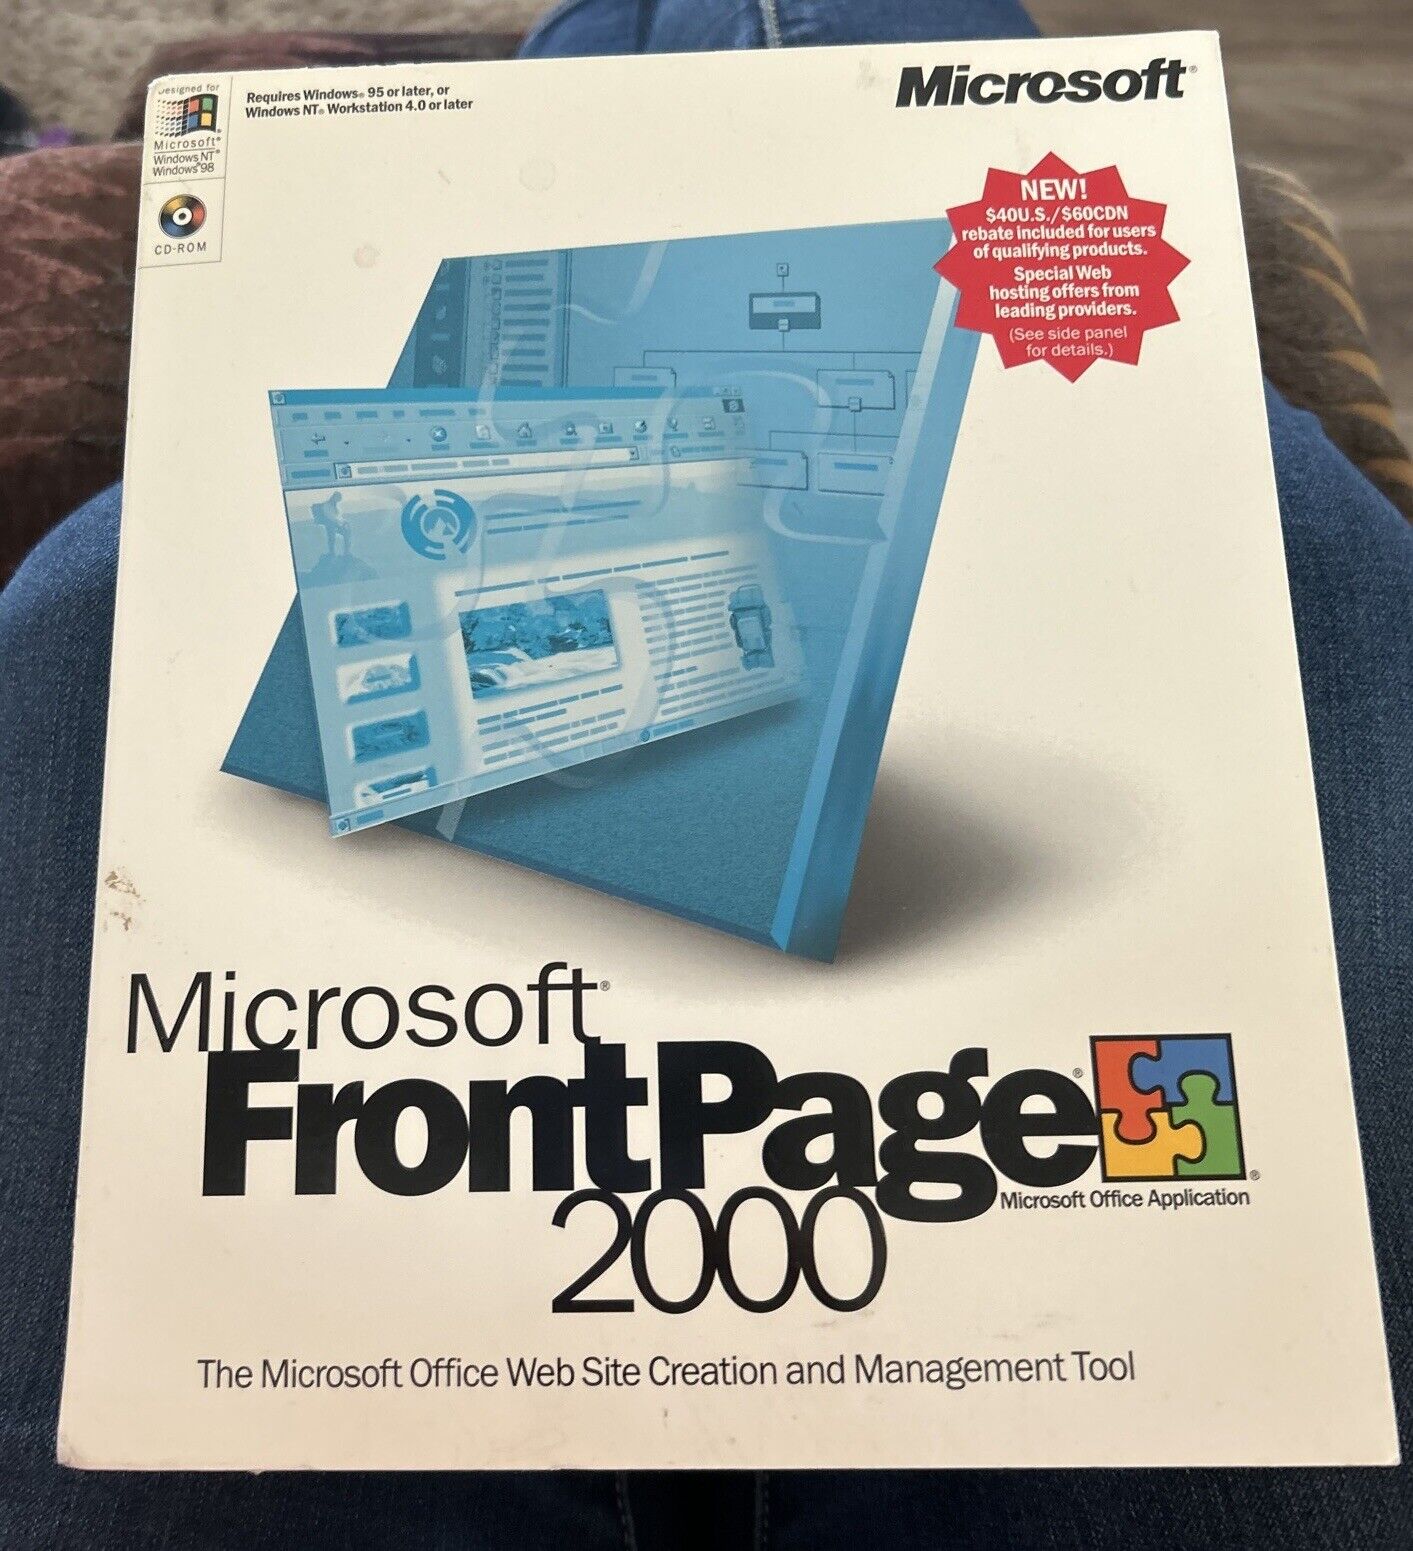 Microsoft FrontPage 2000 Open Box CD-ROM For Windows 95 98 NT 2000